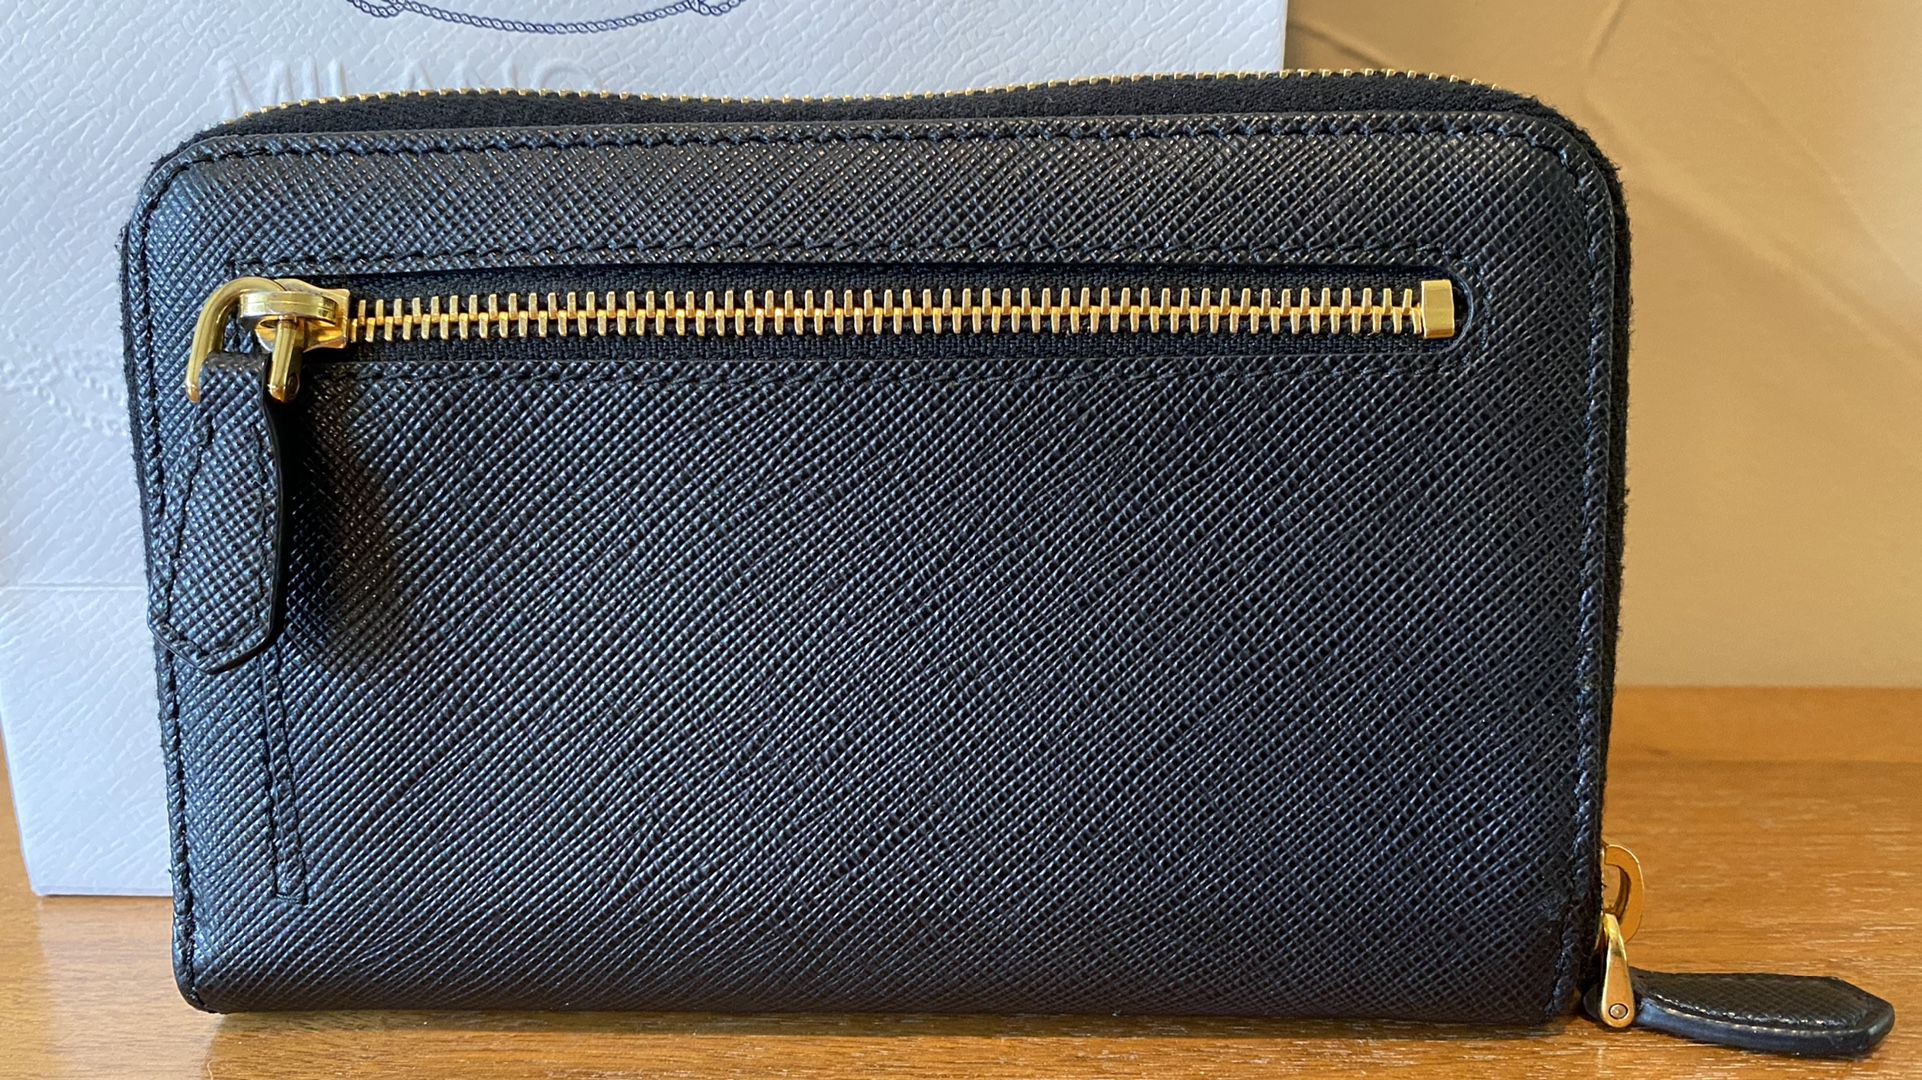 NEW ZIPPERED PRADA CLUTCH WITH CERT OF AUTHENTICITY for Sale in Denver, CO  - OfferUp